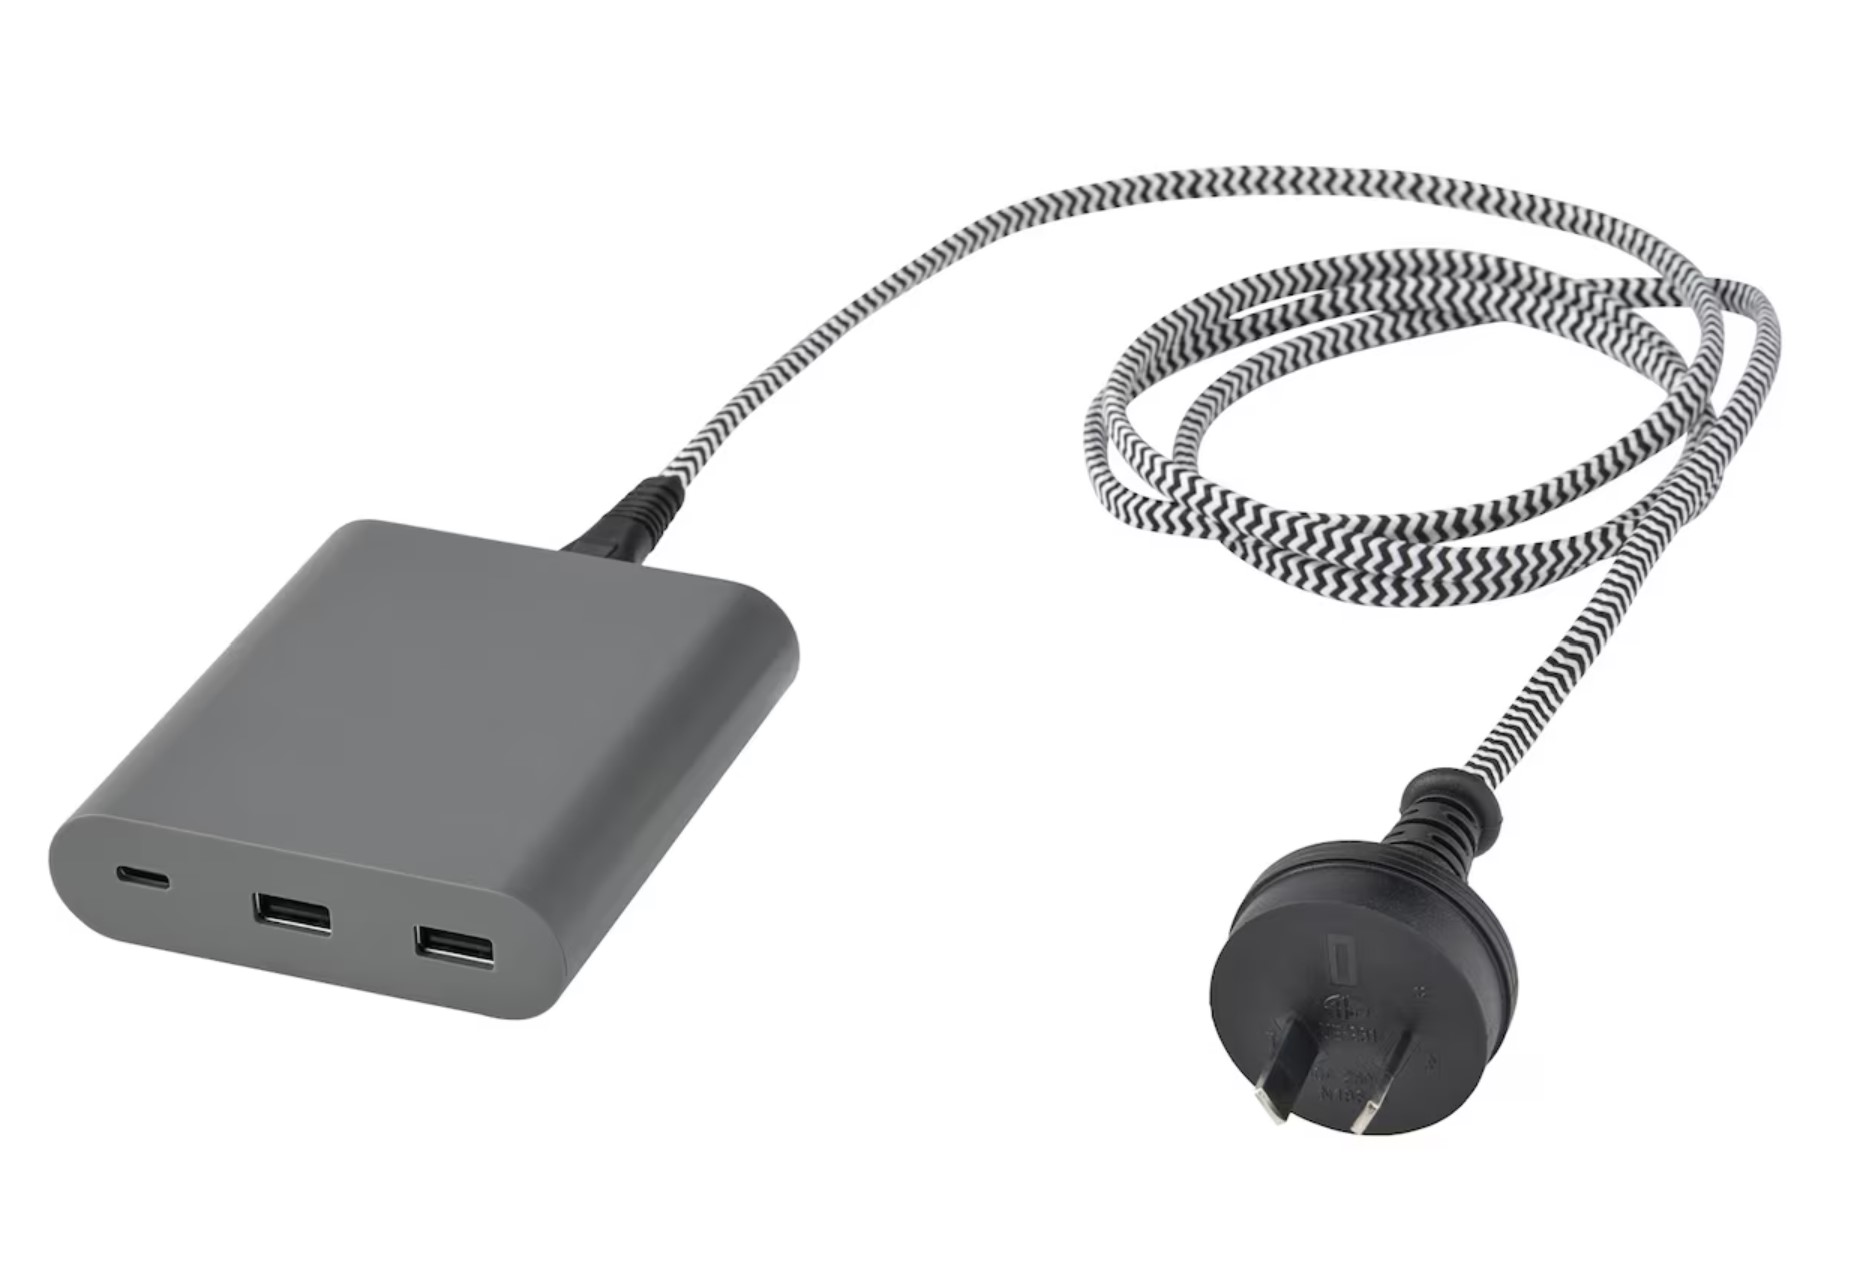 RECALL: IKEA ÅSKSTORM 40W USB charger article number 304.611.94